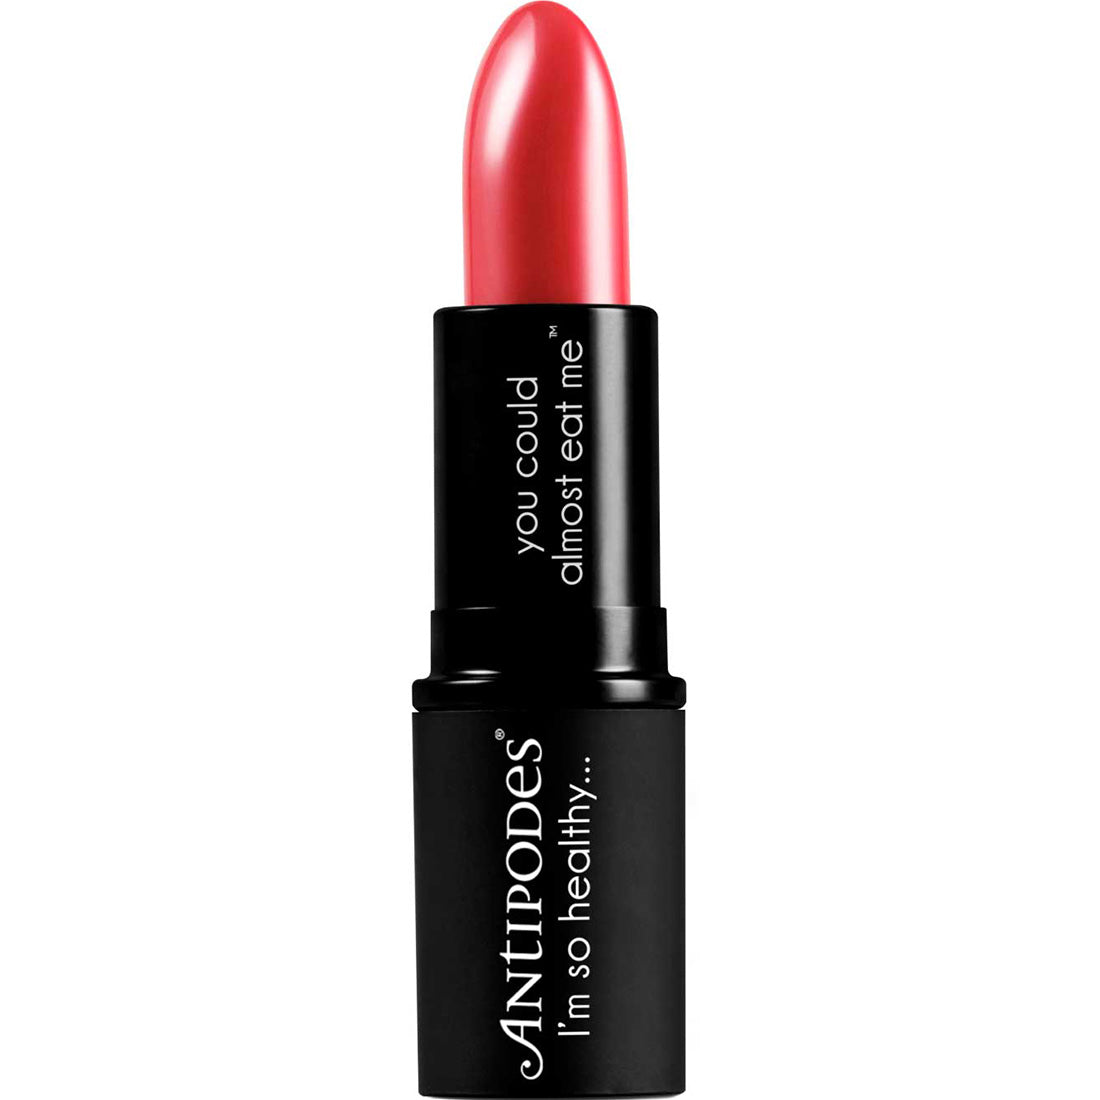 Antipodes Remarkably Red Lipstick, 4g